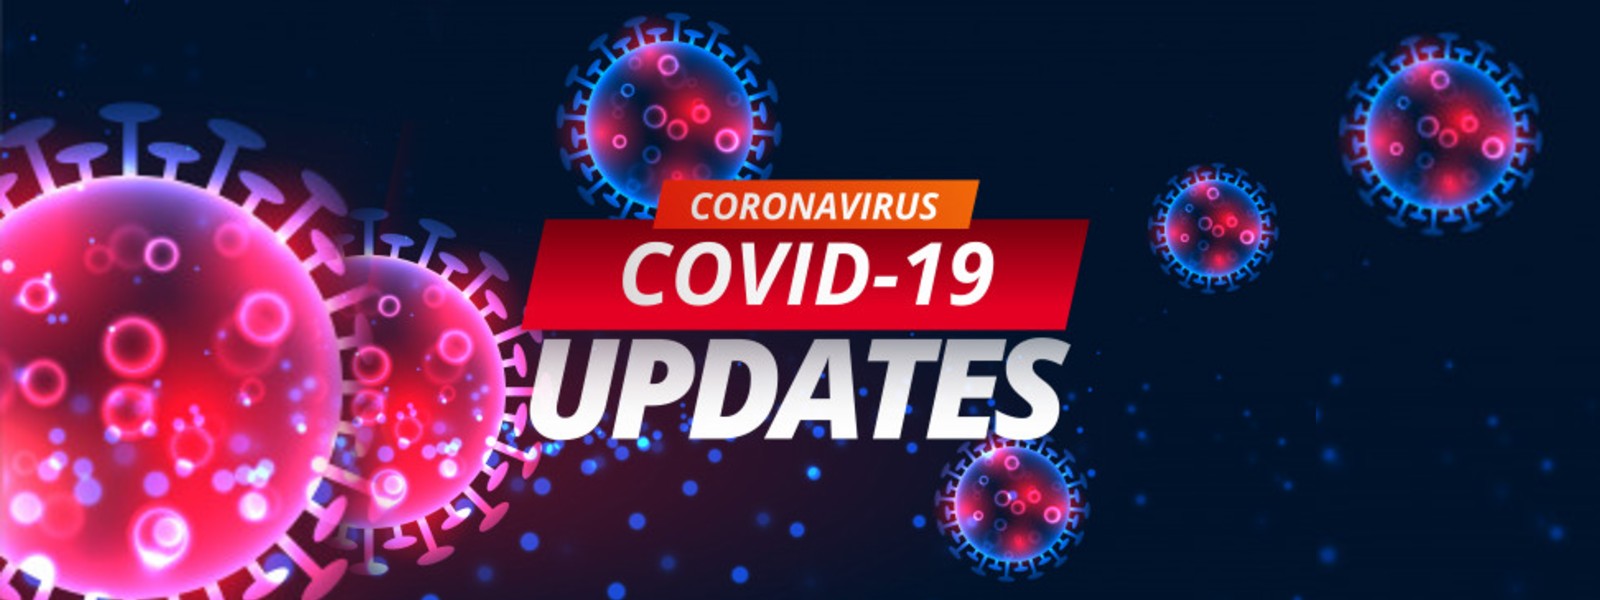 FULL LIST: Authorities release details of Sunday’s (30) COVID detected areas